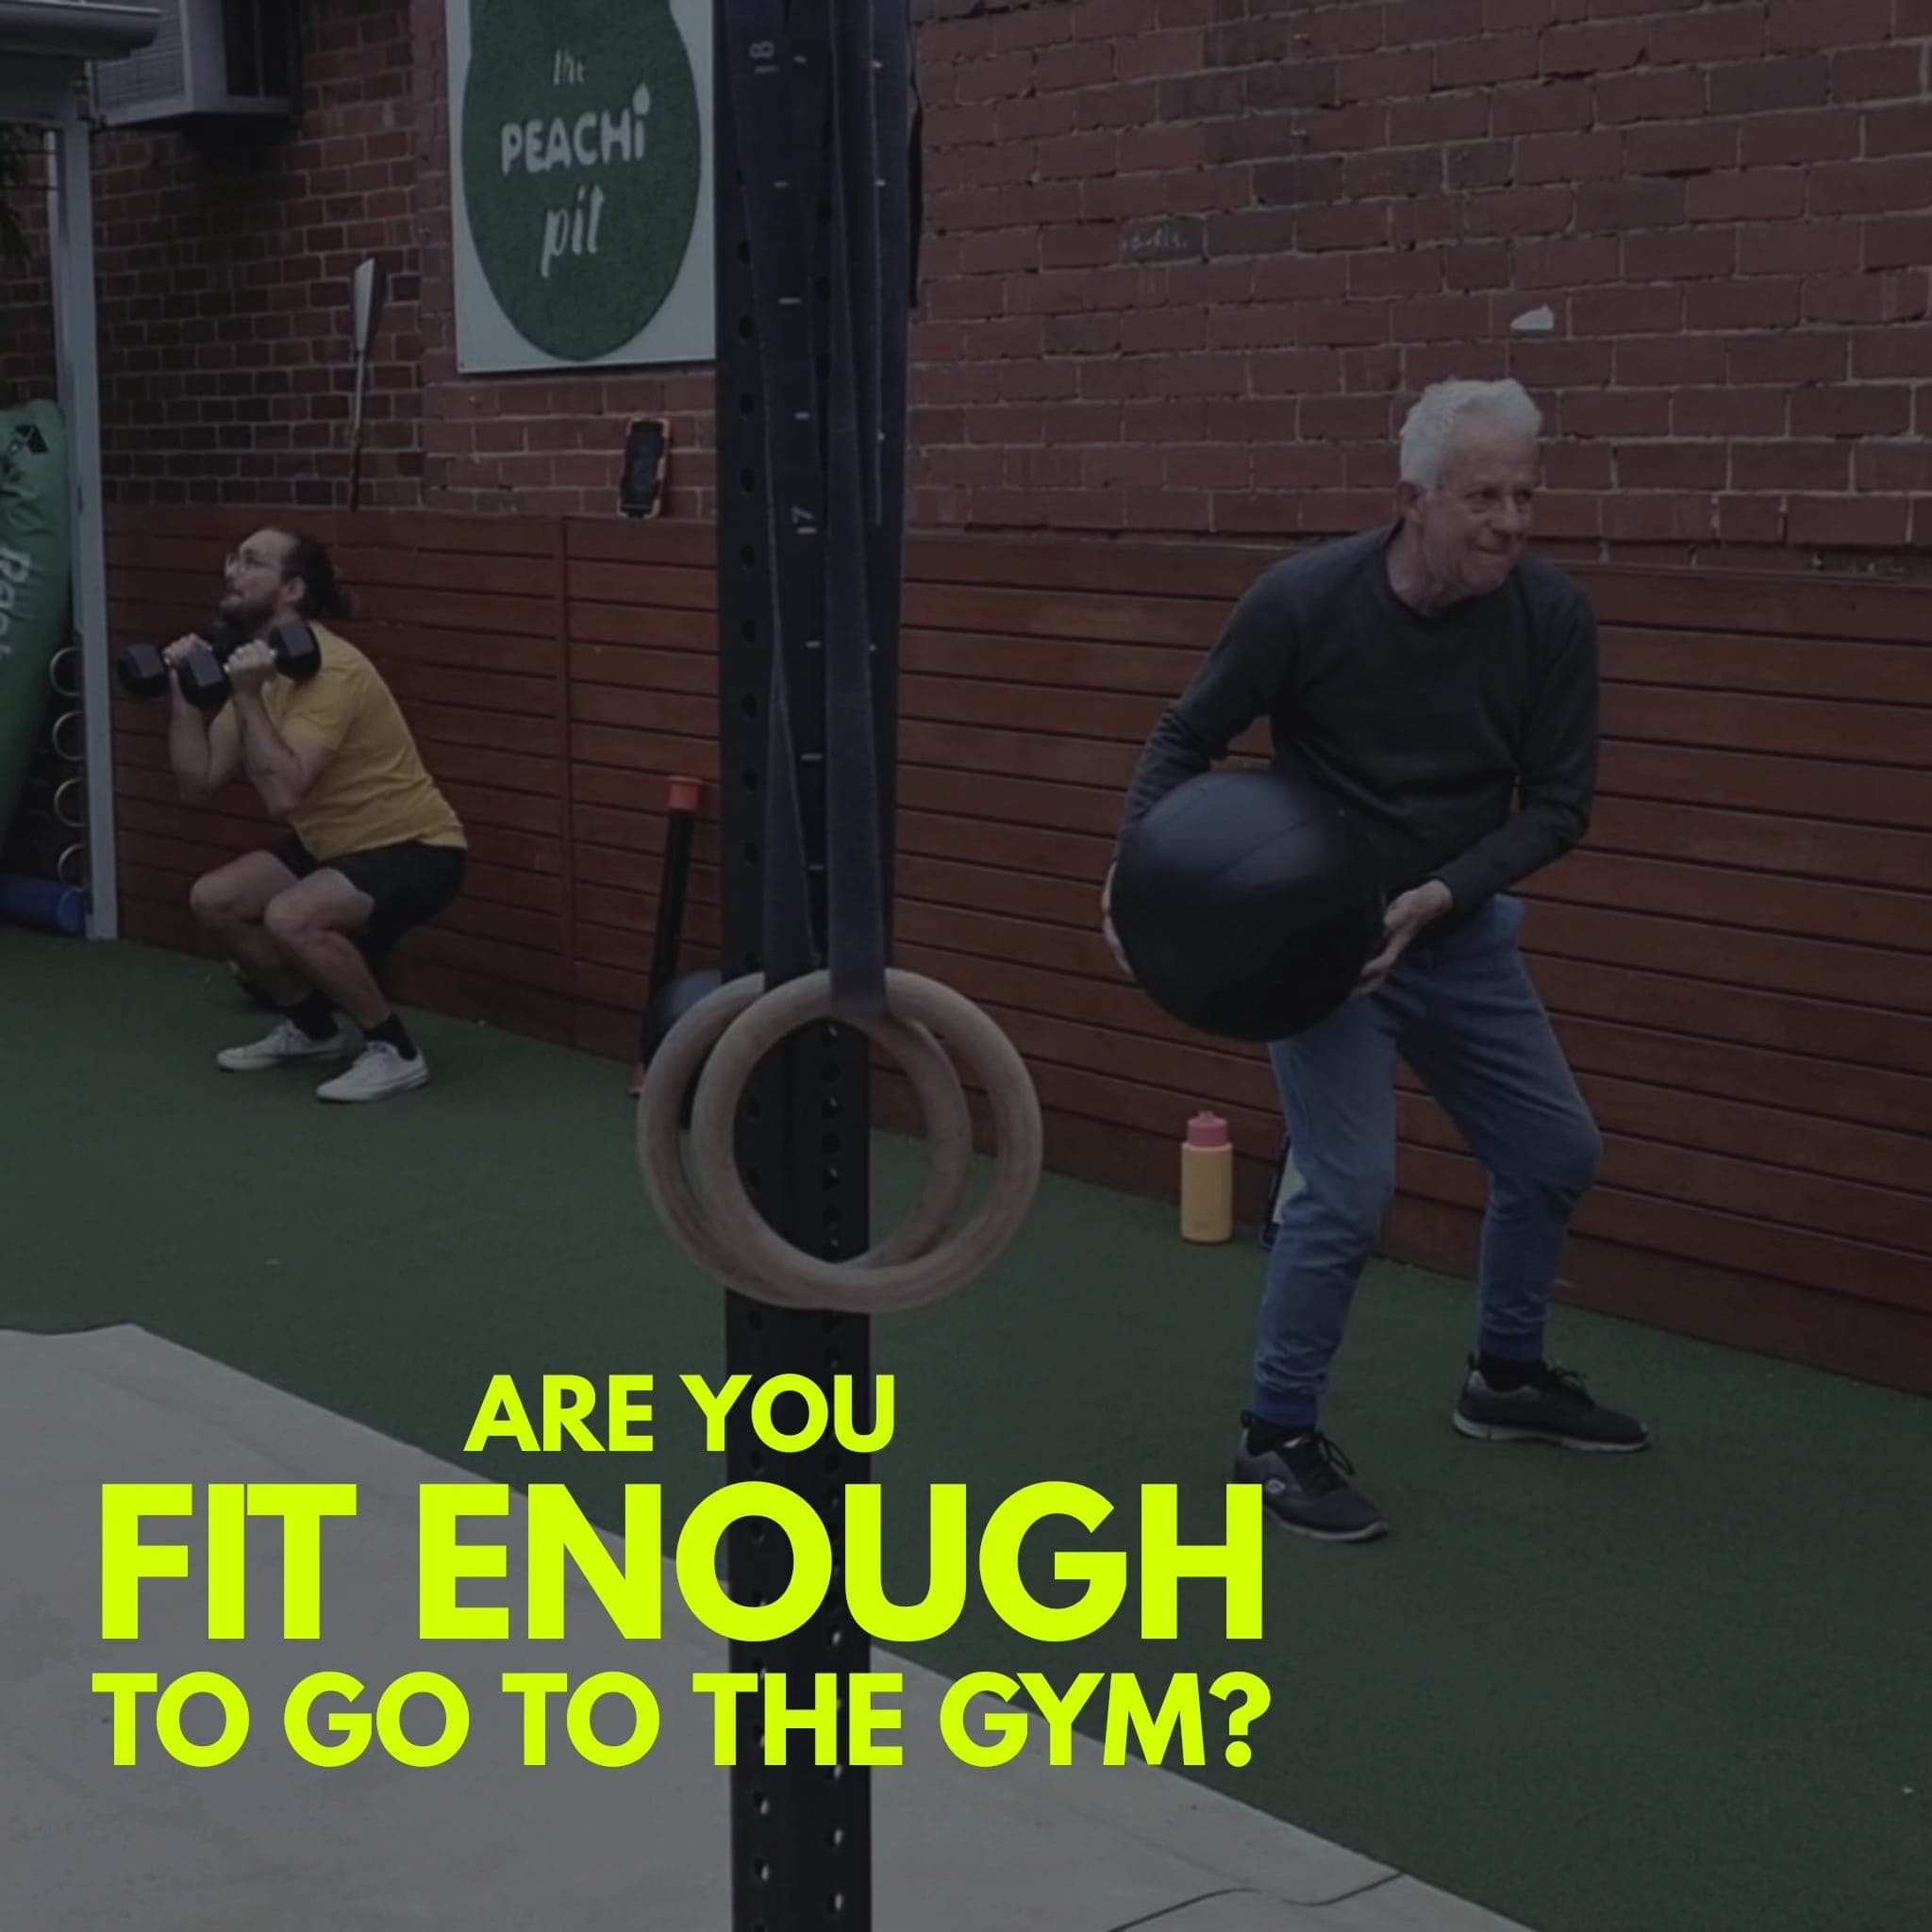 Are you fit enough to go to the gym